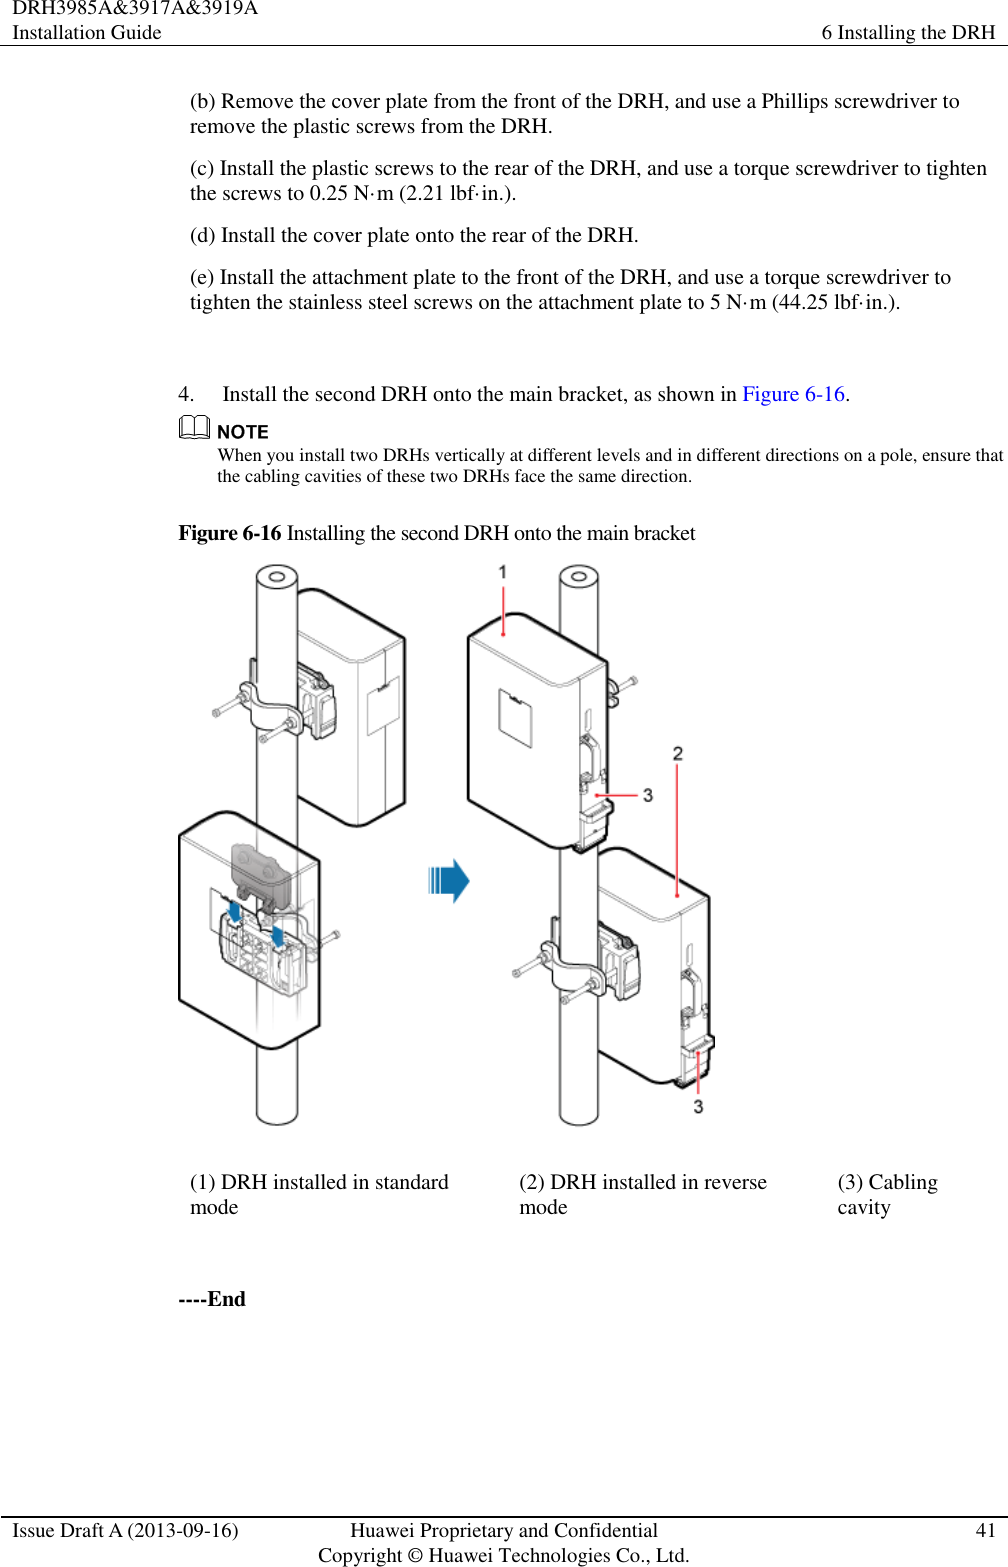 DRH3985A&amp;3917A&amp;3919A Installation Guide 6 Installing the DRH  Issue Draft A (2013-09-16) Huawei Proprietary and Confidential                                     Copyright © Huawei Technologies Co., Ltd. 41  (b) Remove the cover plate from the front of the DRH, and use a Phillips screwdriver to remove the plastic screws from the DRH. (c) Install the plastic screws to the rear of the DRH, and use a torque screwdriver to tighten the screws to 0.25 N·m (2.21 lbf·in.). (d) Install the cover plate onto the rear of the DRH. (e) Install the attachment plate to the front of the DRH, and use a torque screwdriver to tighten the stainless steel screws on the attachment plate to 5 N·m (44.25 lbf·in.).  4. Install the second DRH onto the main bracket, as shown in Figure 6-16.  When you install two DRHs vertically at different levels and in different directions on a pole, ensure that the cabling cavities of these two DRHs face the same direction. Figure 6-16 Installing the second DRH onto the main bracket  (1) DRH installed in standard mode (2) DRH installed in reverse mode (3) Cabling cavity  ----End 